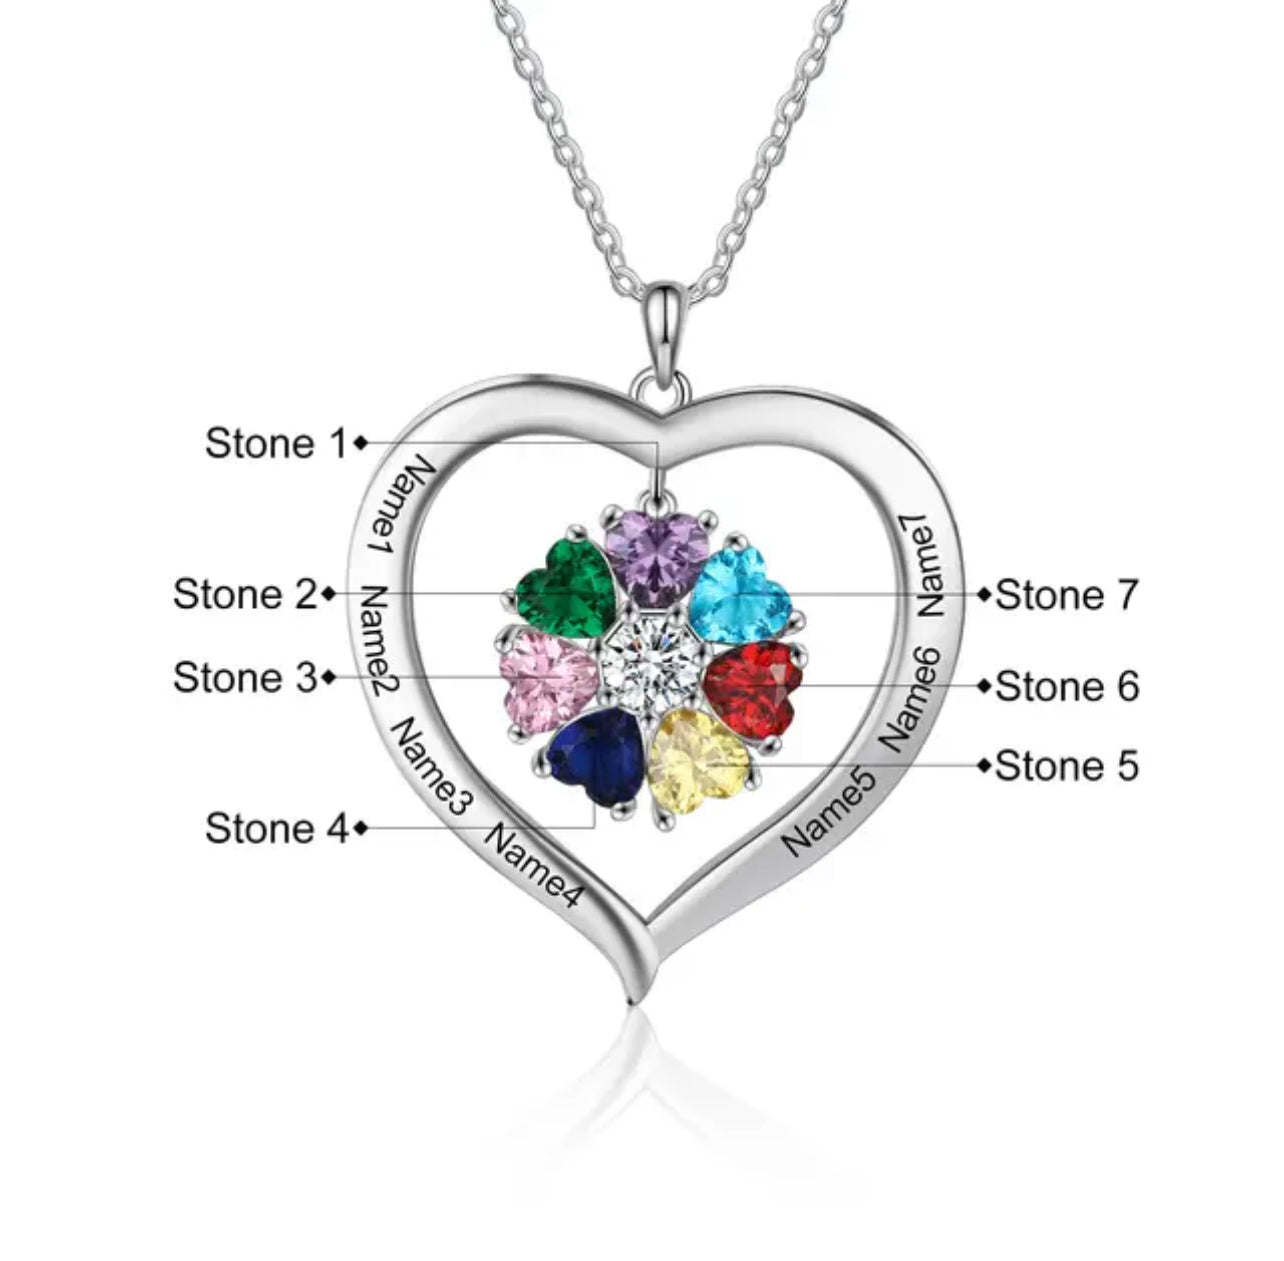 One Heart Beat Necklace